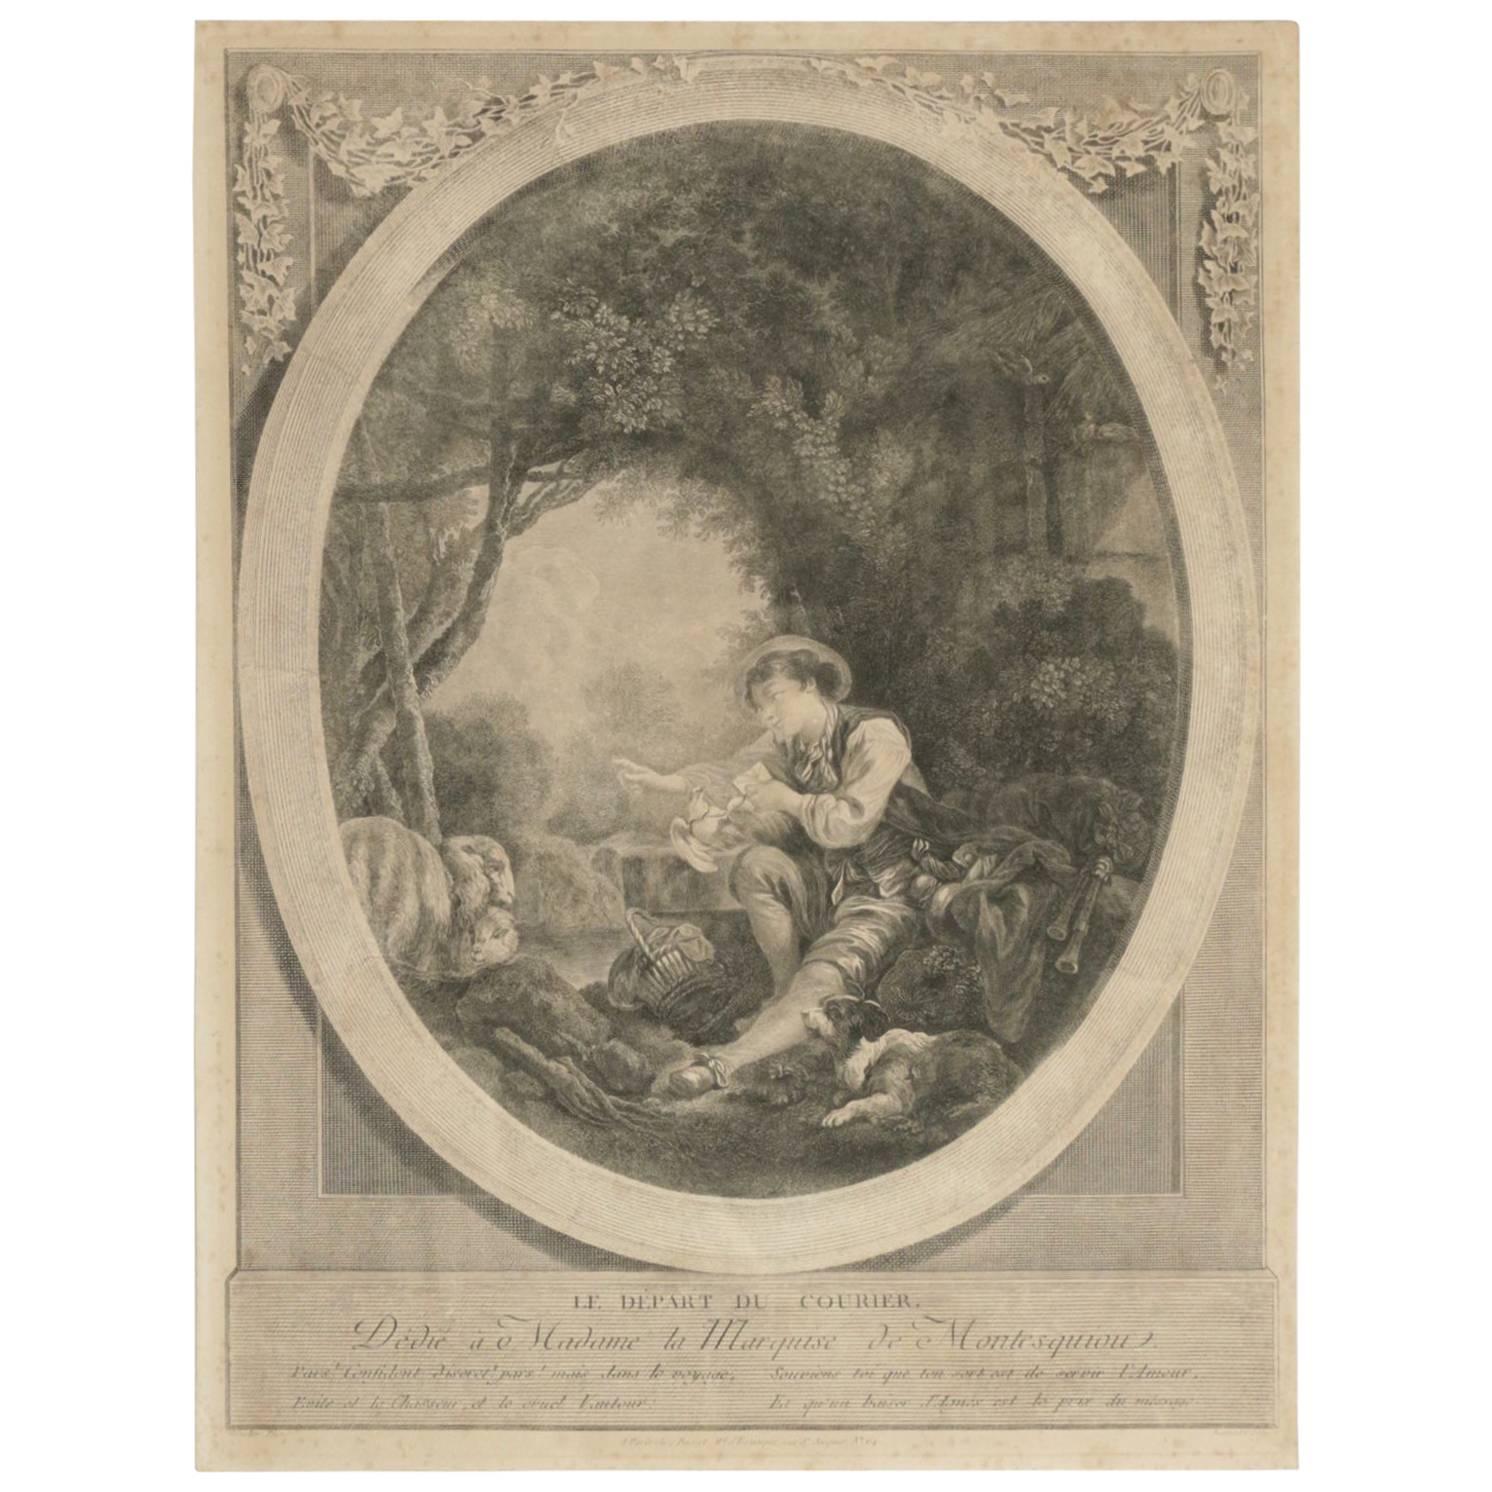 Steel Engraving from the 19th Century “Le Depart Du Courier” For Sale